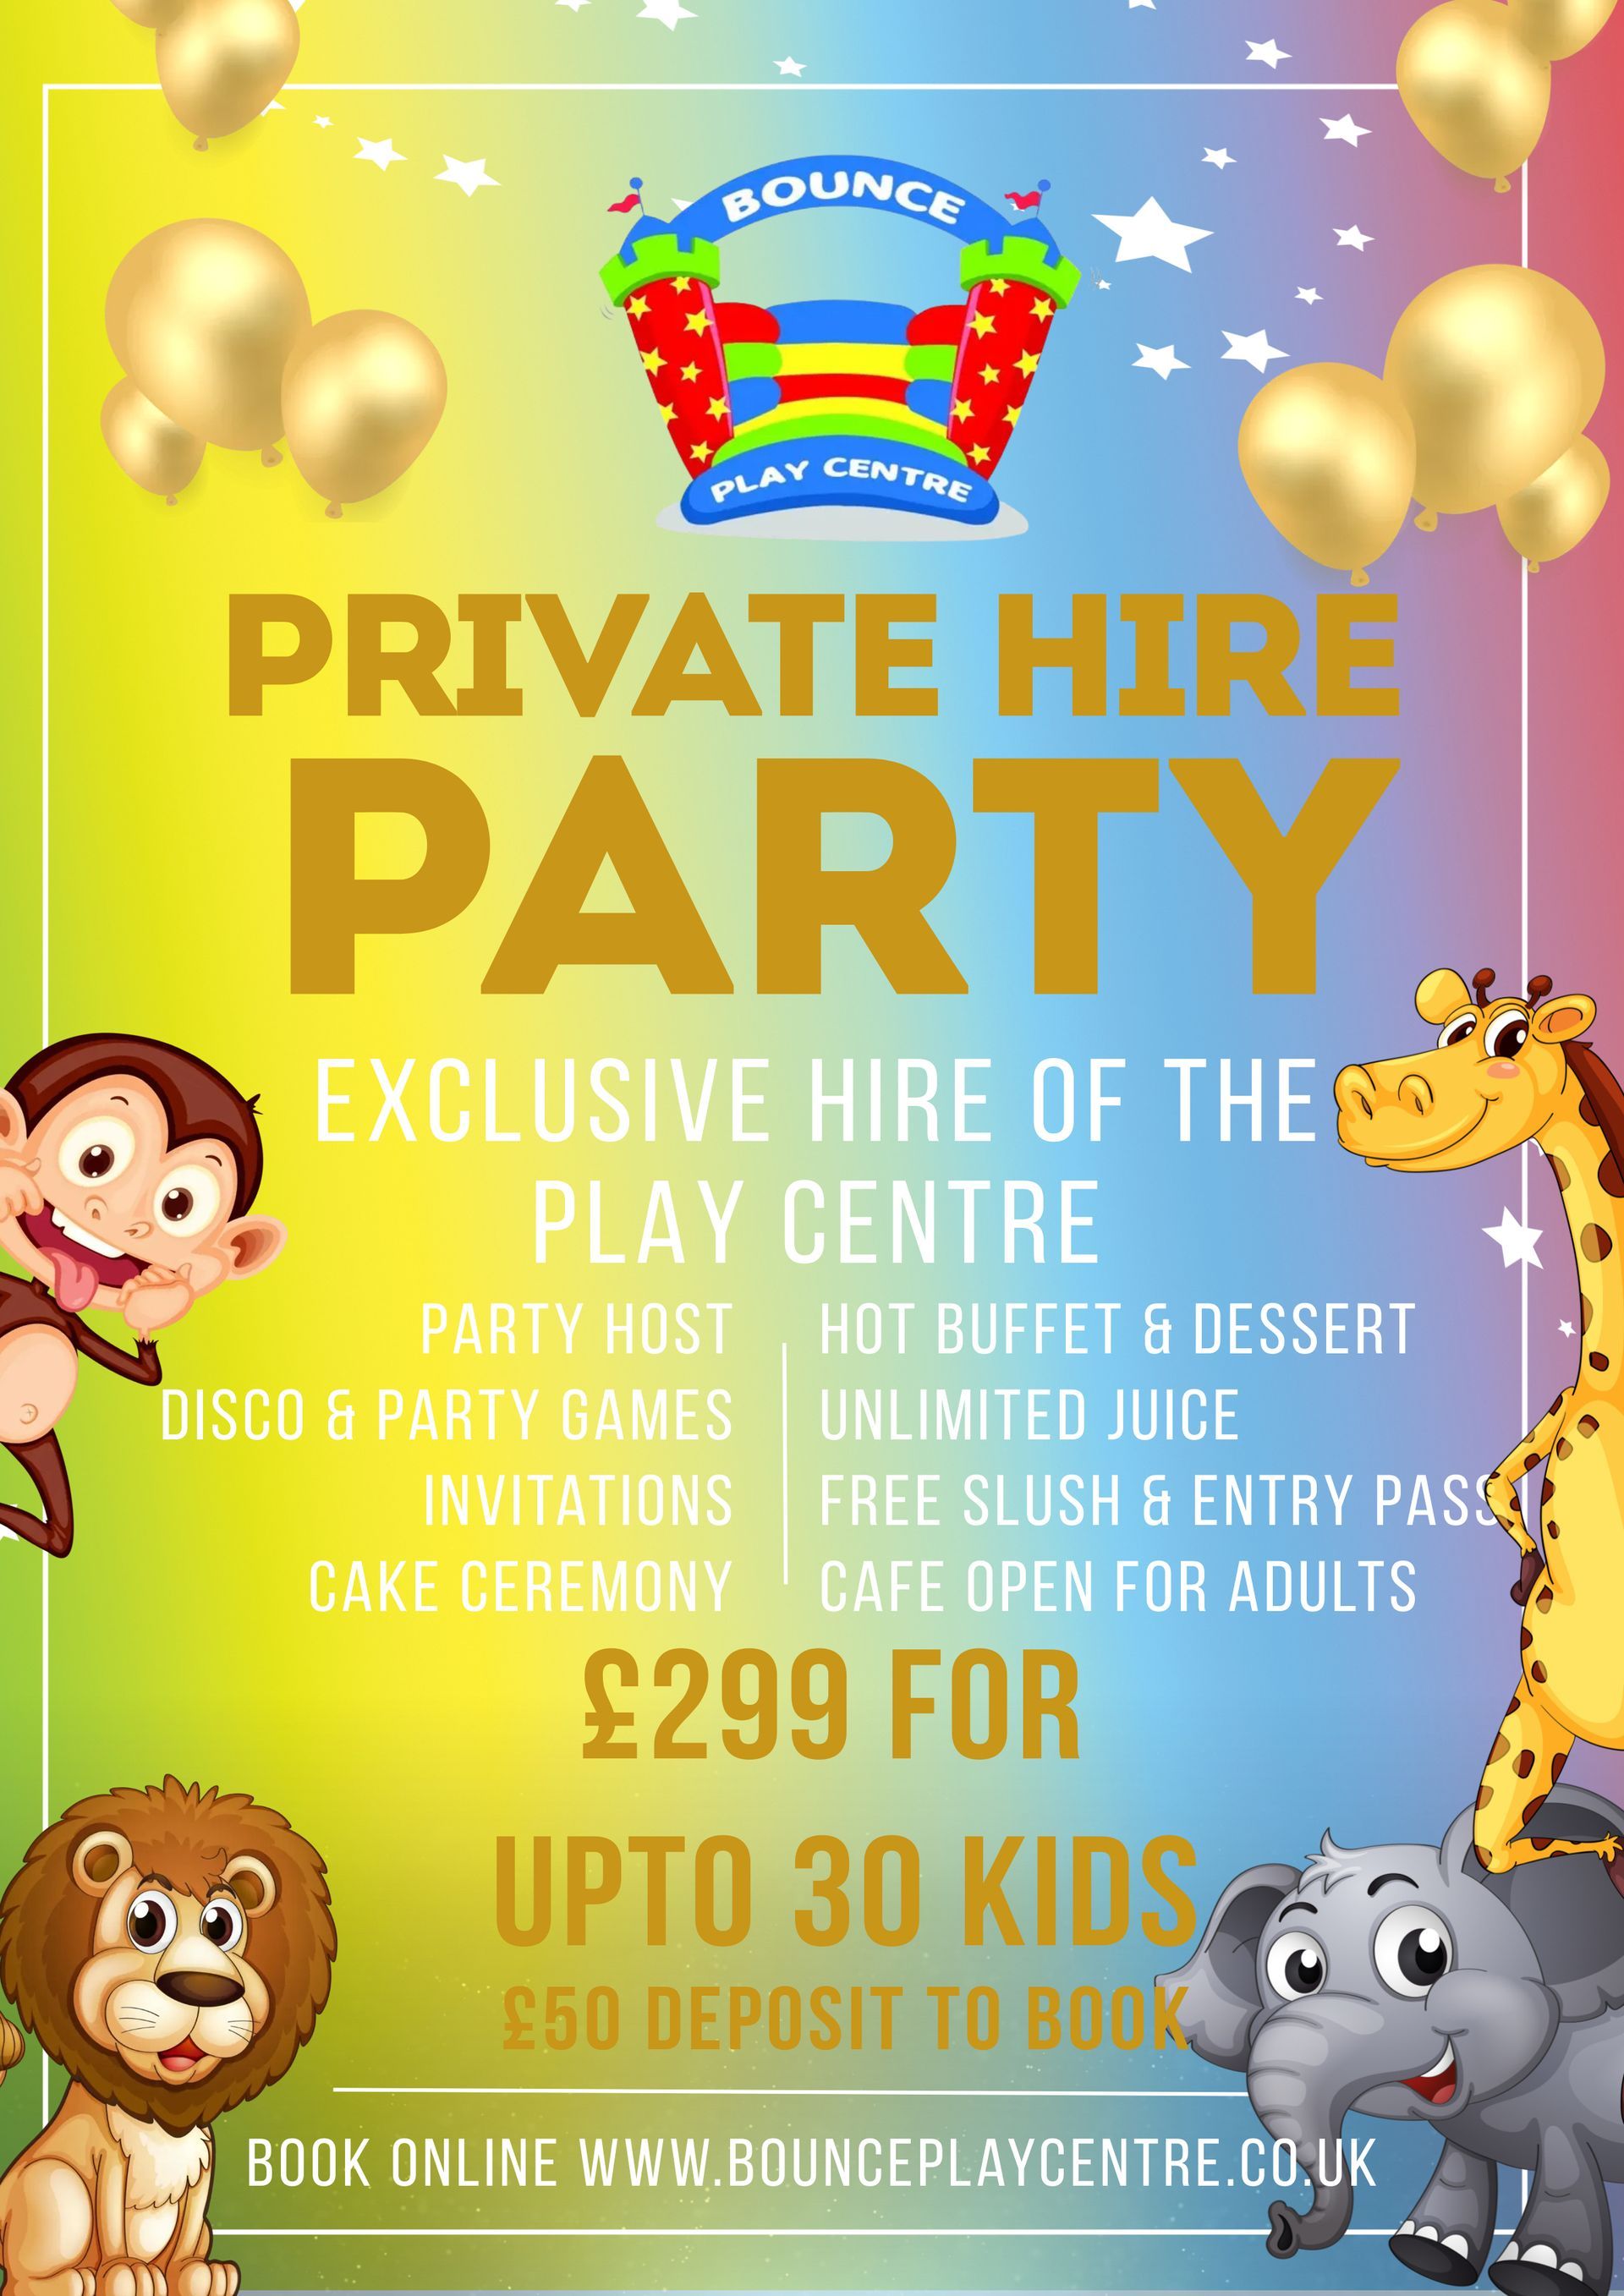 Bounce Private Hire Party